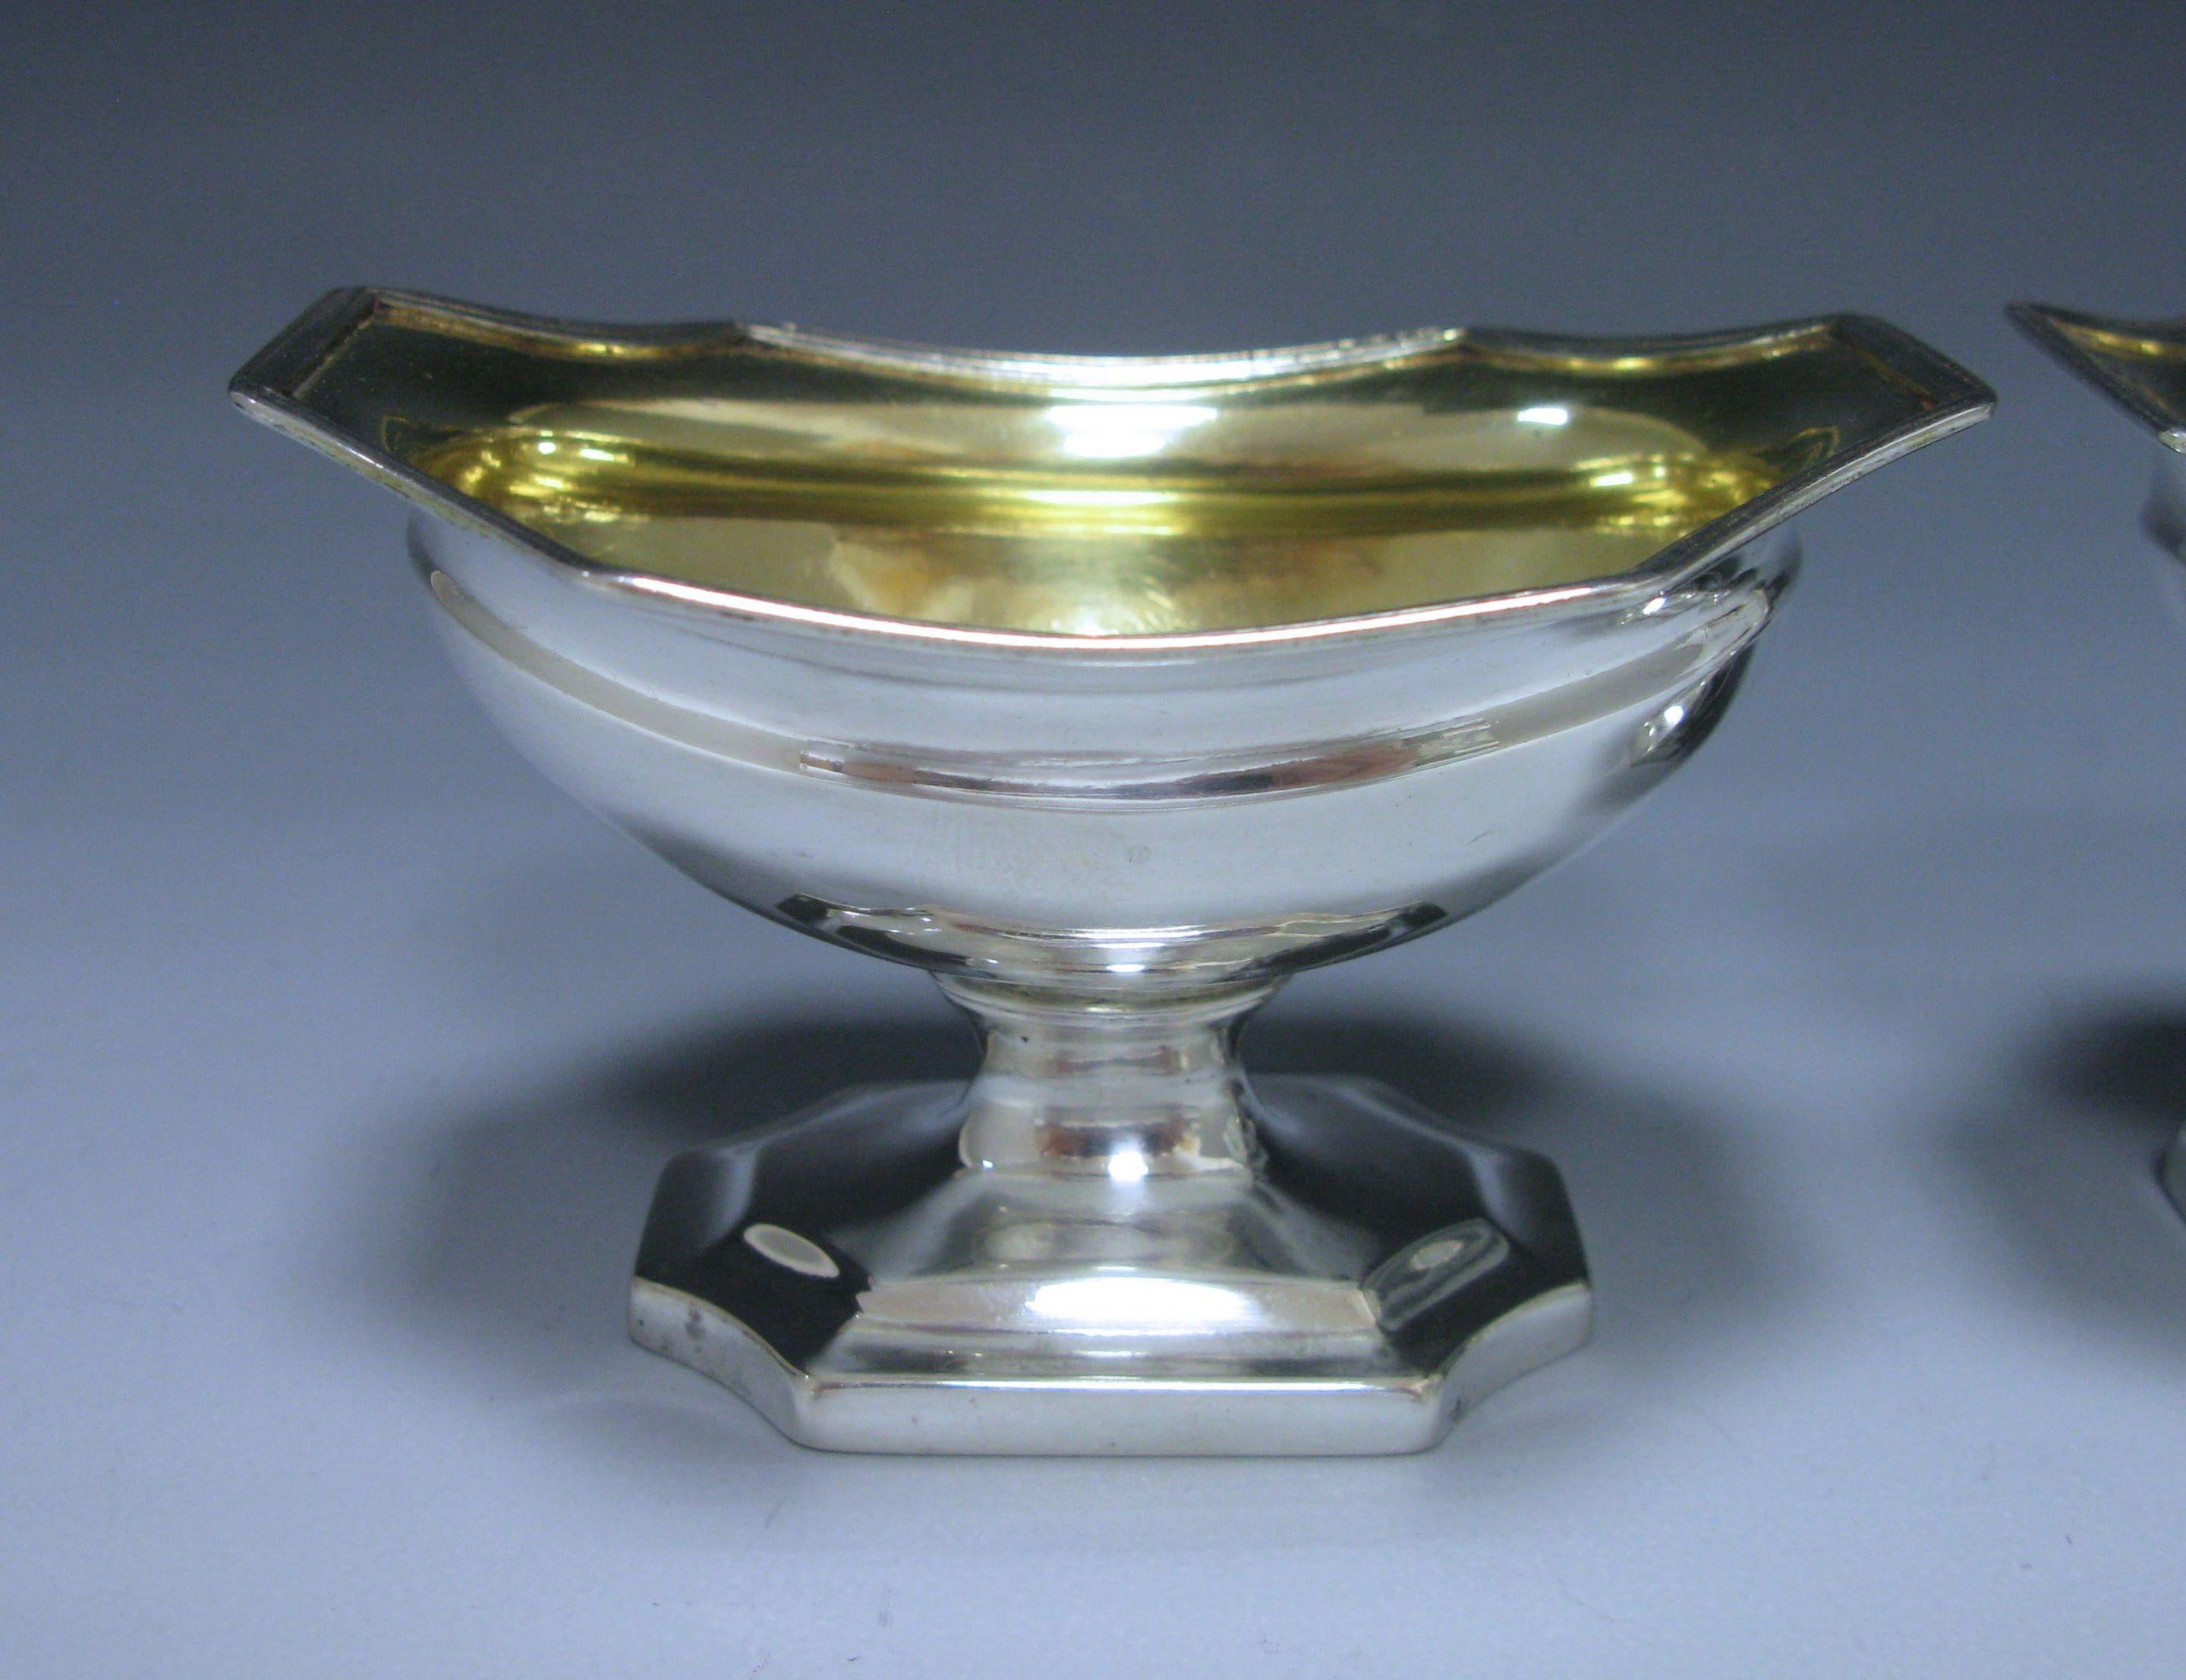 A delightful pair of George III antique silver salts which are of oval shaped form with shaped octagonal borders. The bodies are plain and unembellished, they also stand on shaped oval pedestal bases. The interiors have the original gilding. By